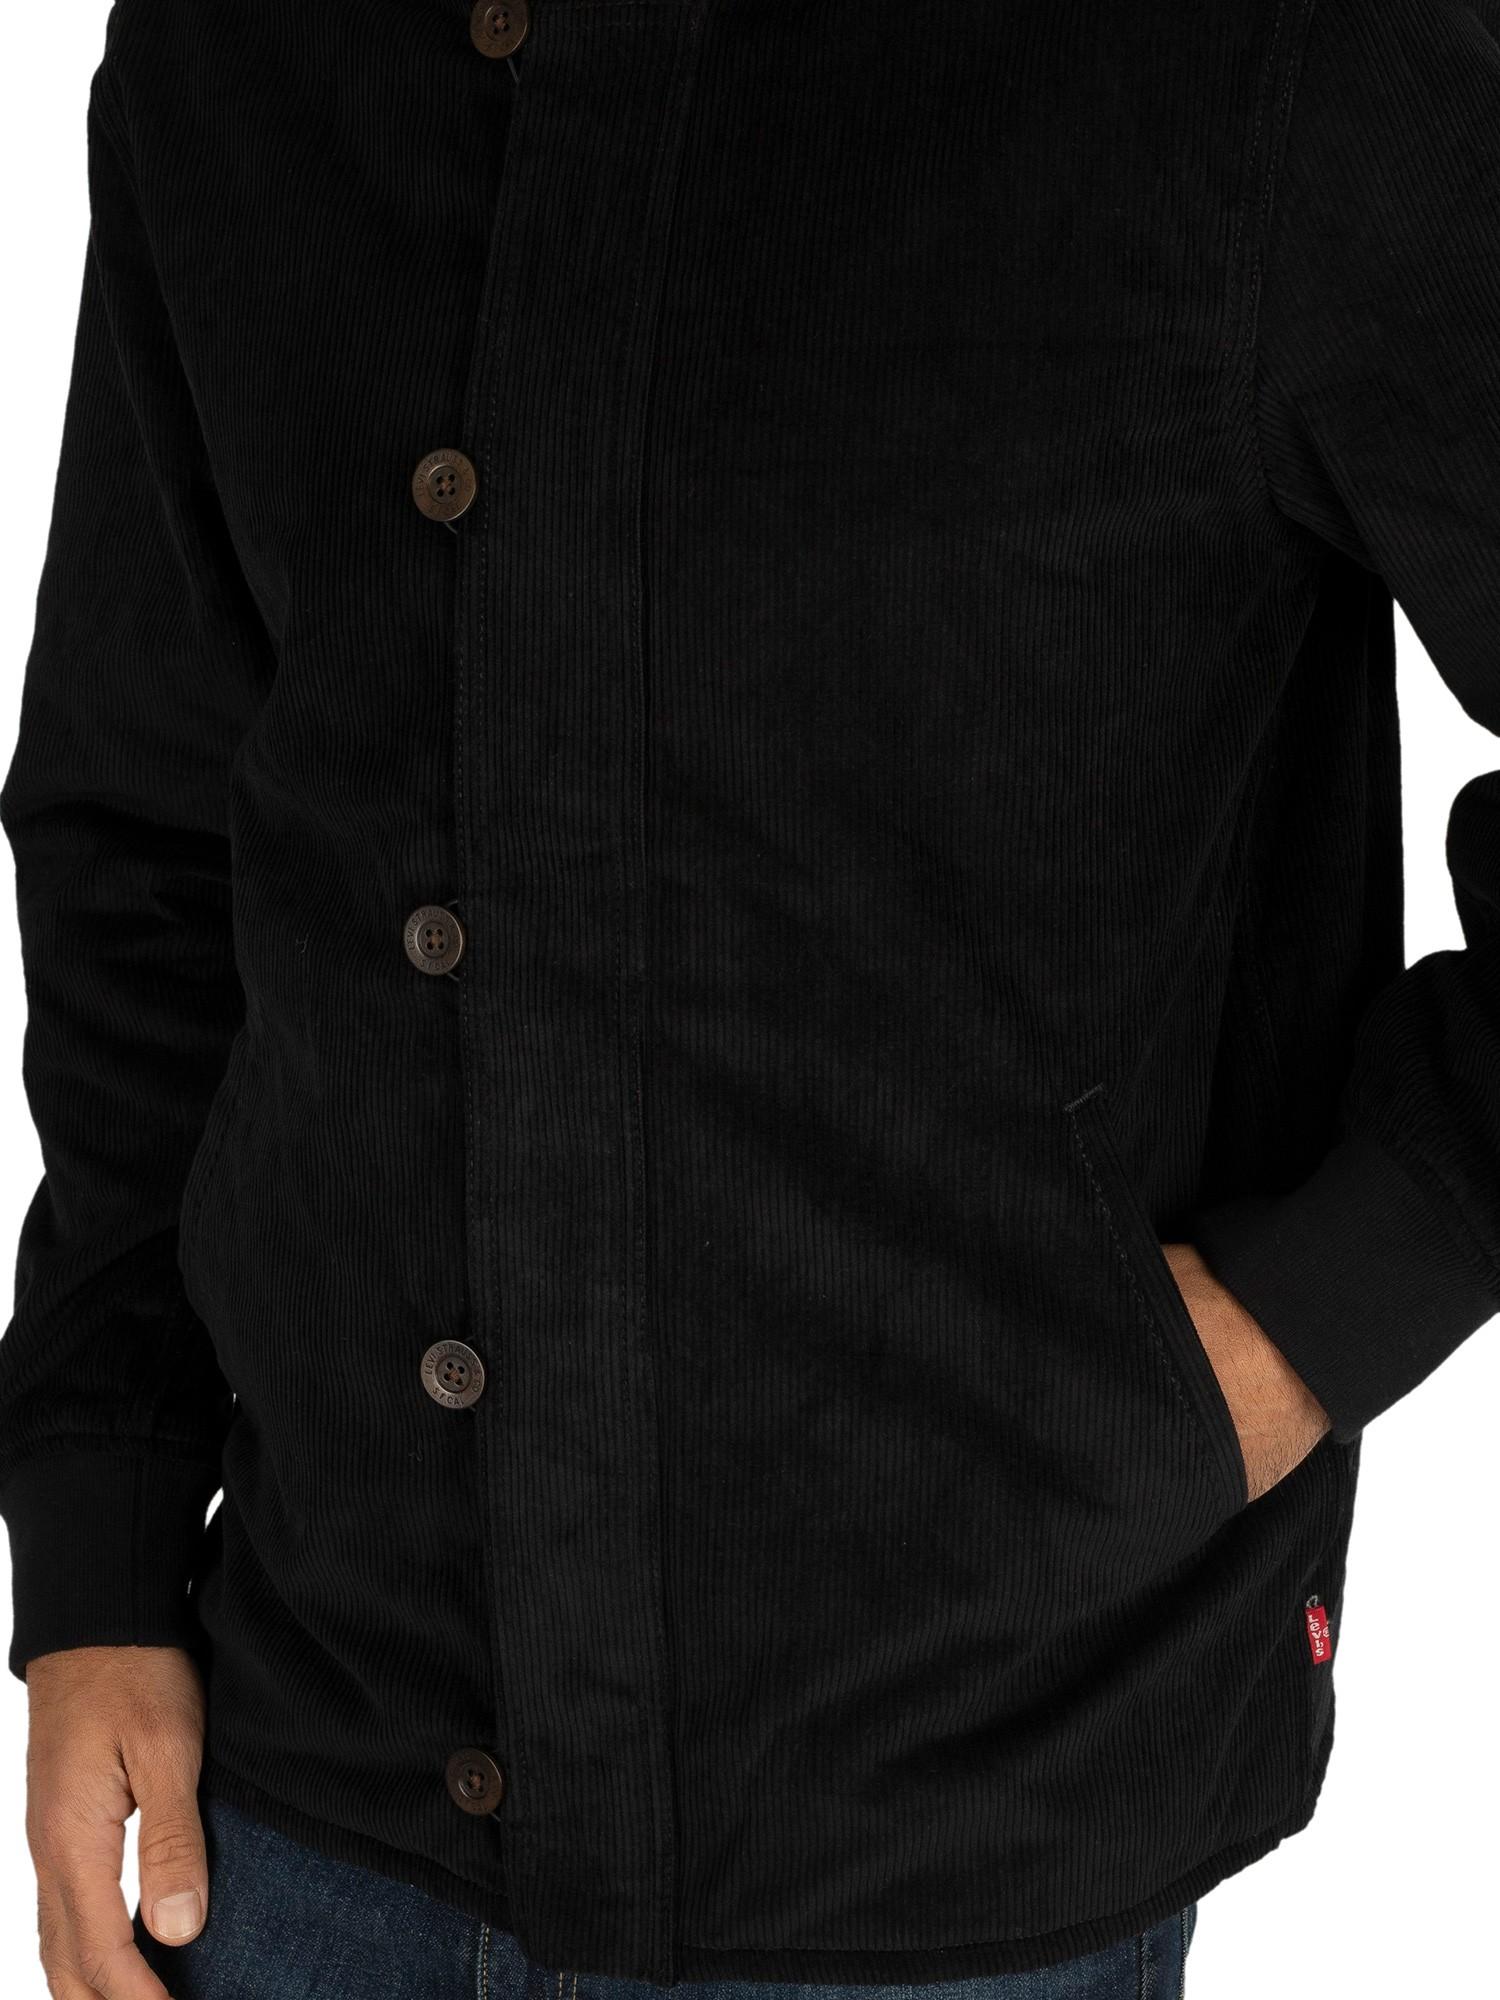 Levi's Quilted Deck Bomber Jacket in Black for Men - Lyst